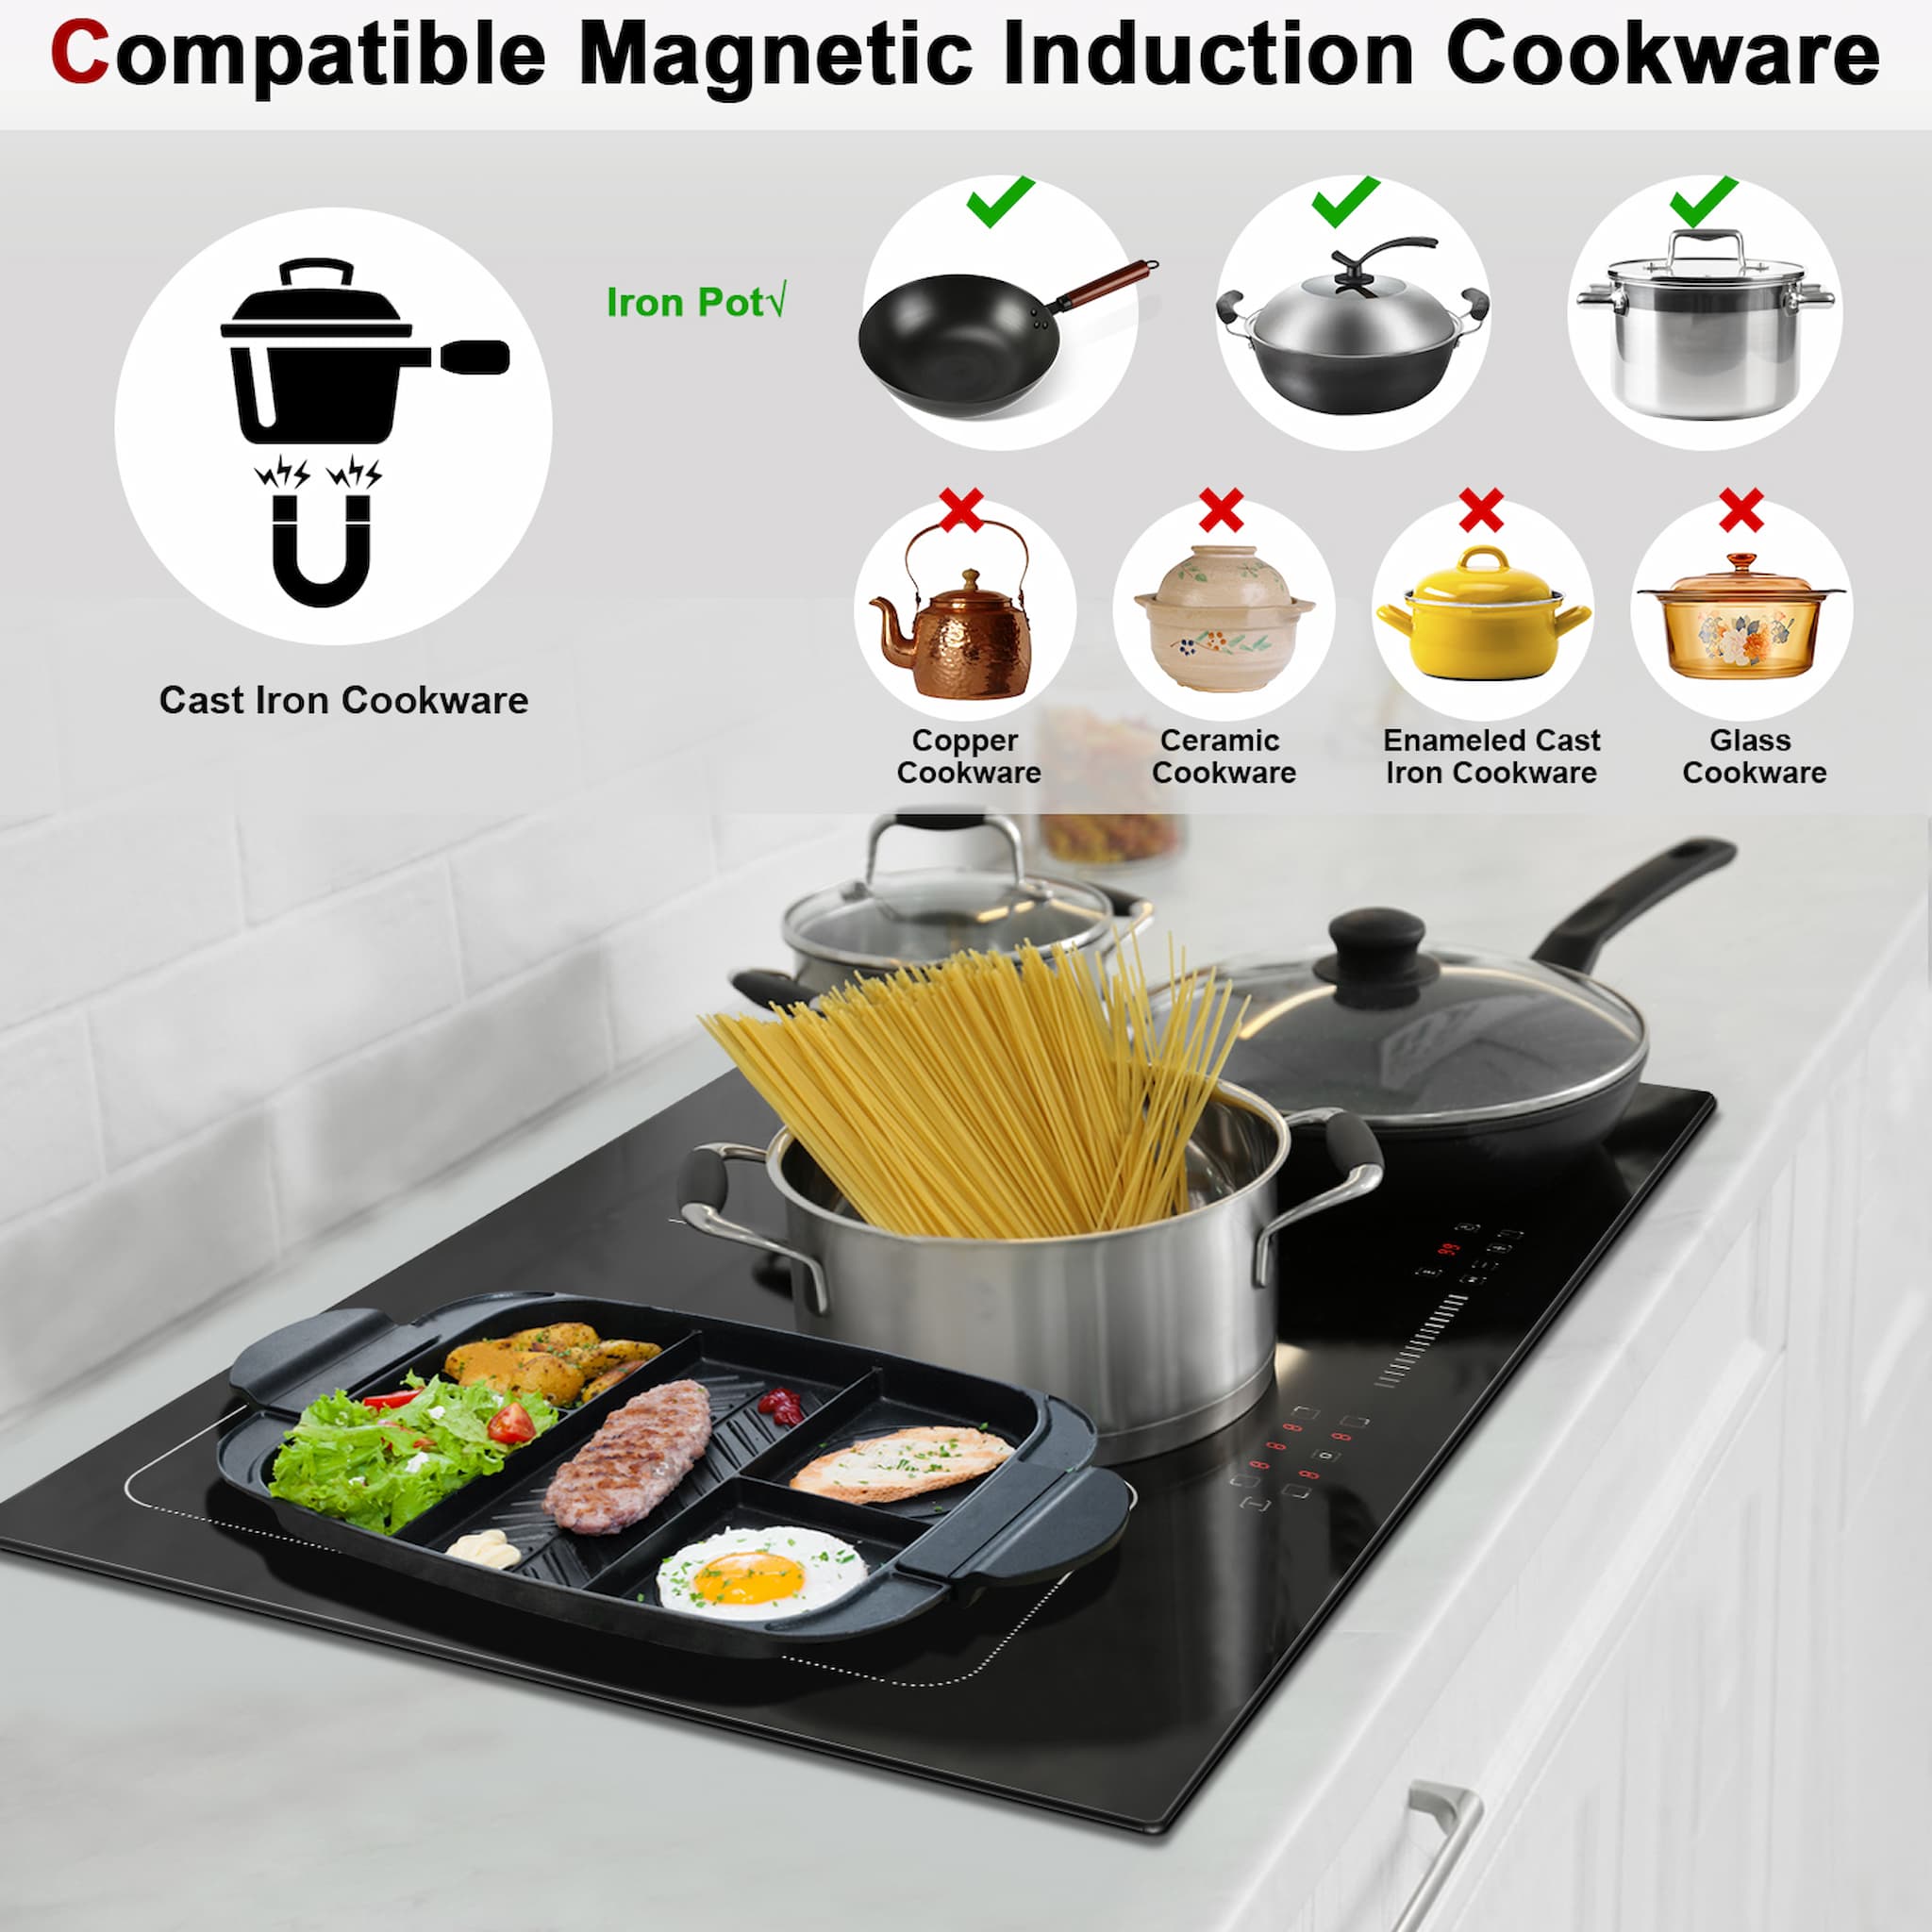 1. When you use the flex zone, please make sure the pan is centered on the two areas and they cover both crosses in the middle of homes, otherwise the electric cooktop will stop heating, because of the undetected utensils.